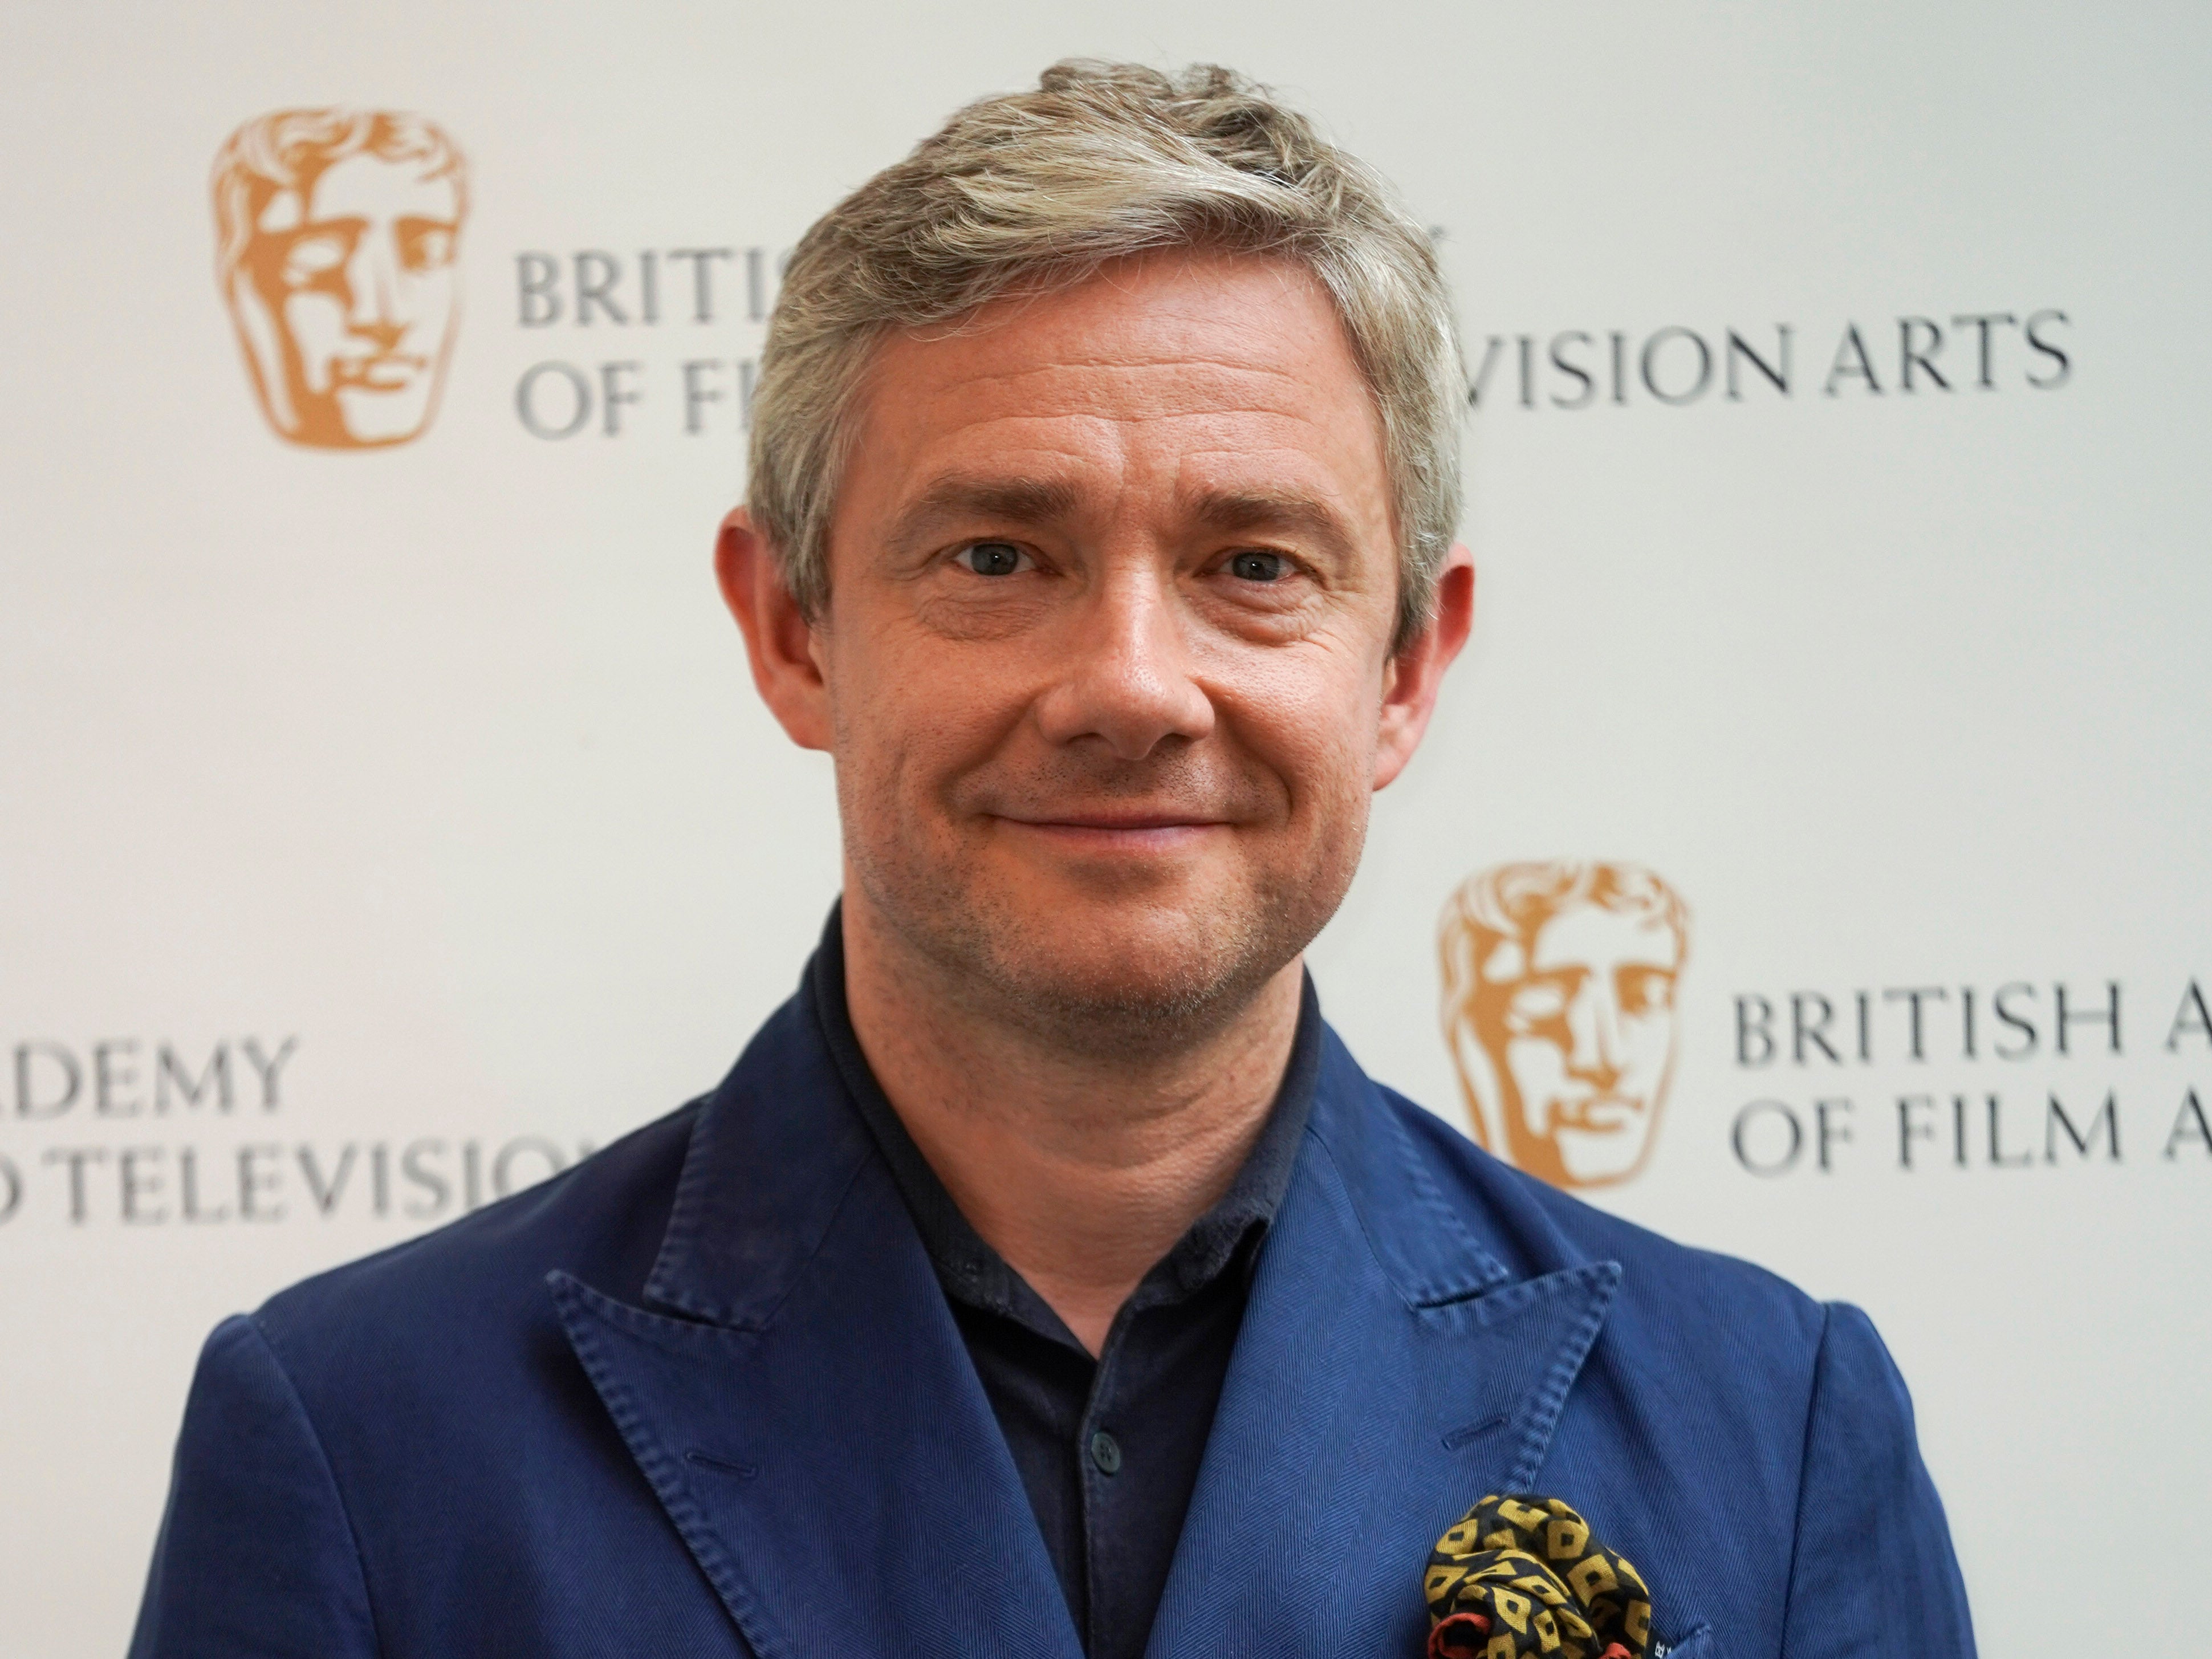 Martin Freeman has turned his back on vegetarianism after 38 years, and described scotch eggs as 'food of the gods'